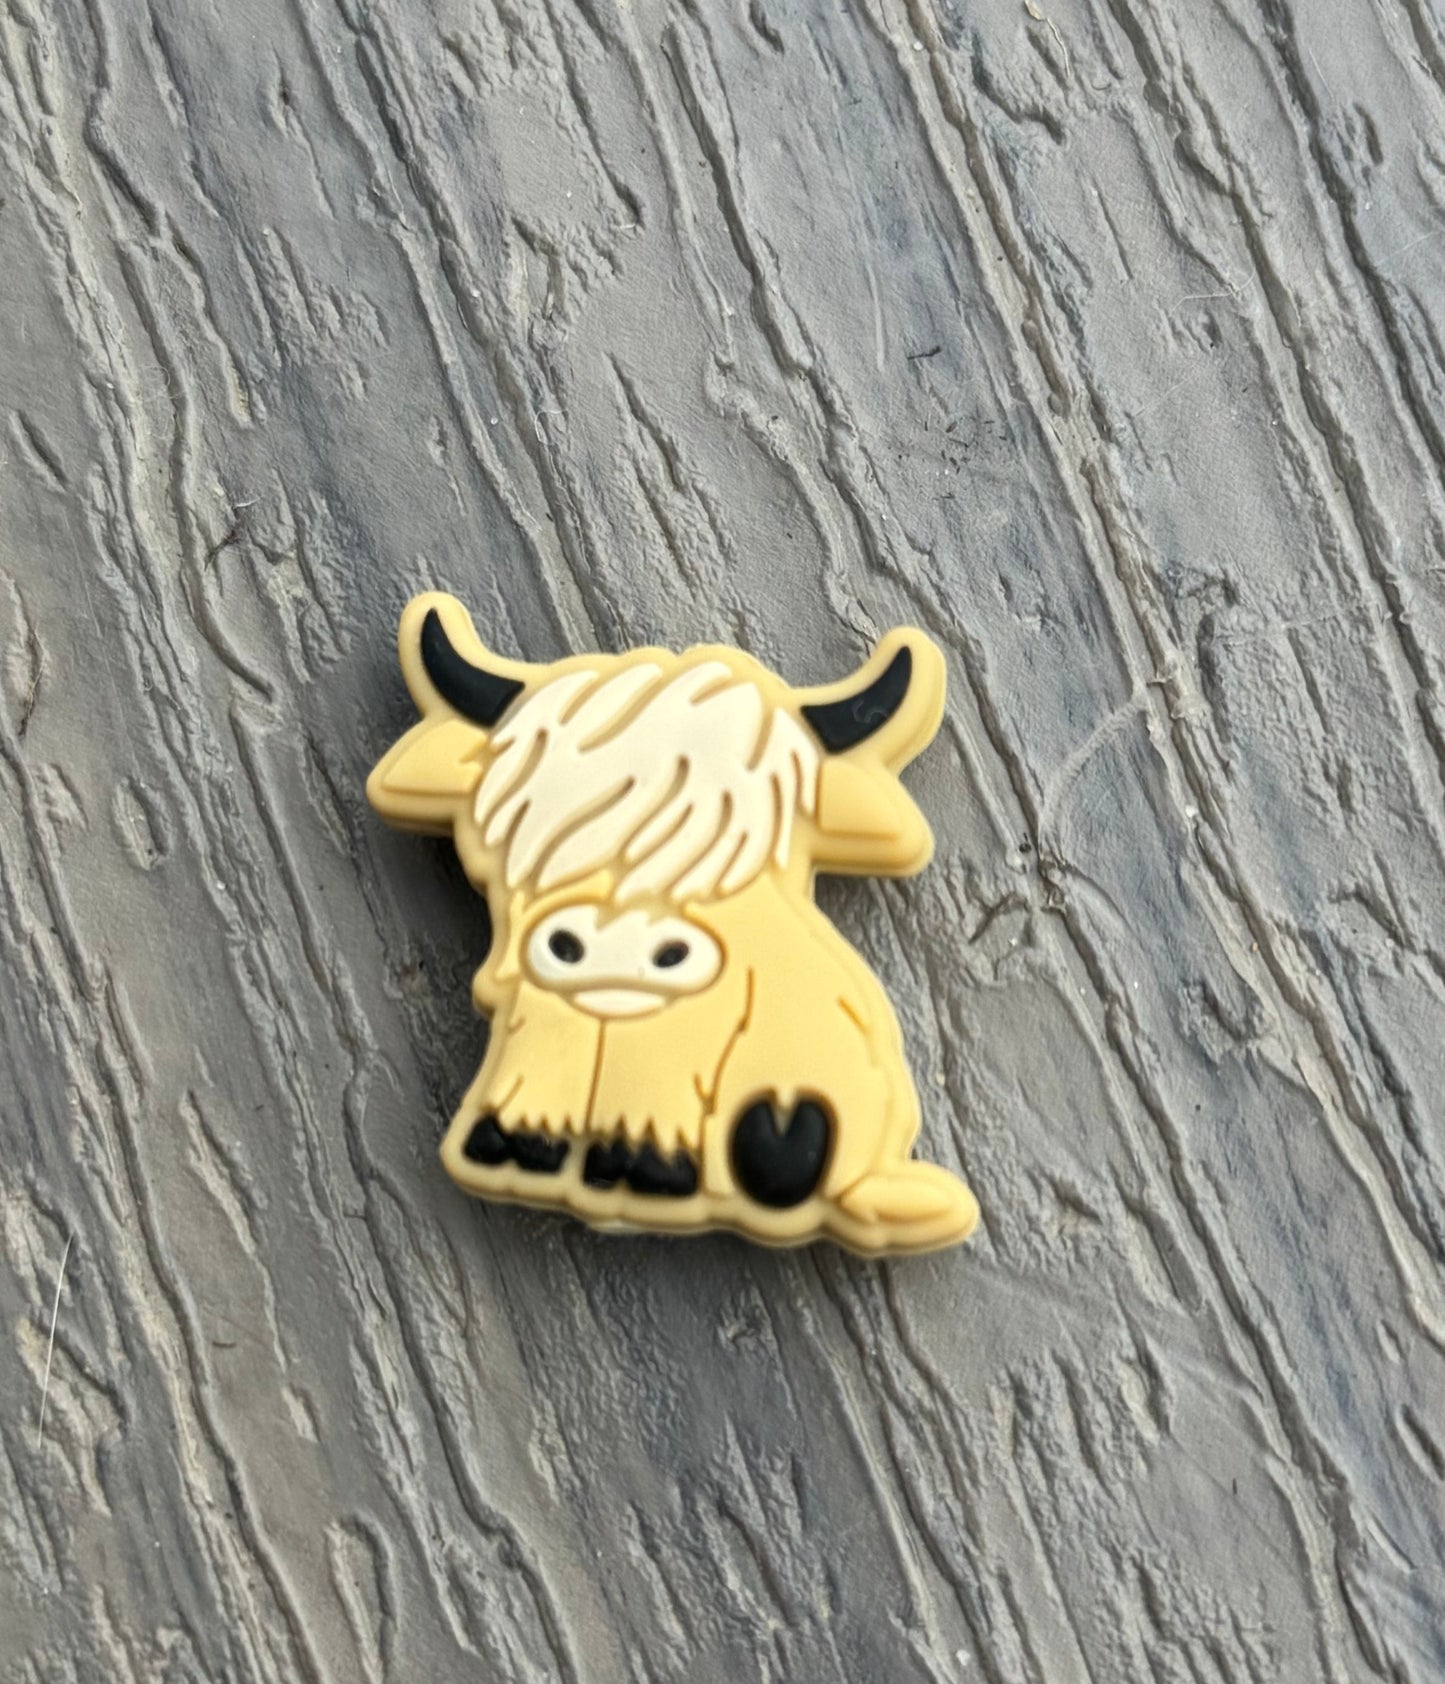 Highland Cow Focal - Available in Two Colors